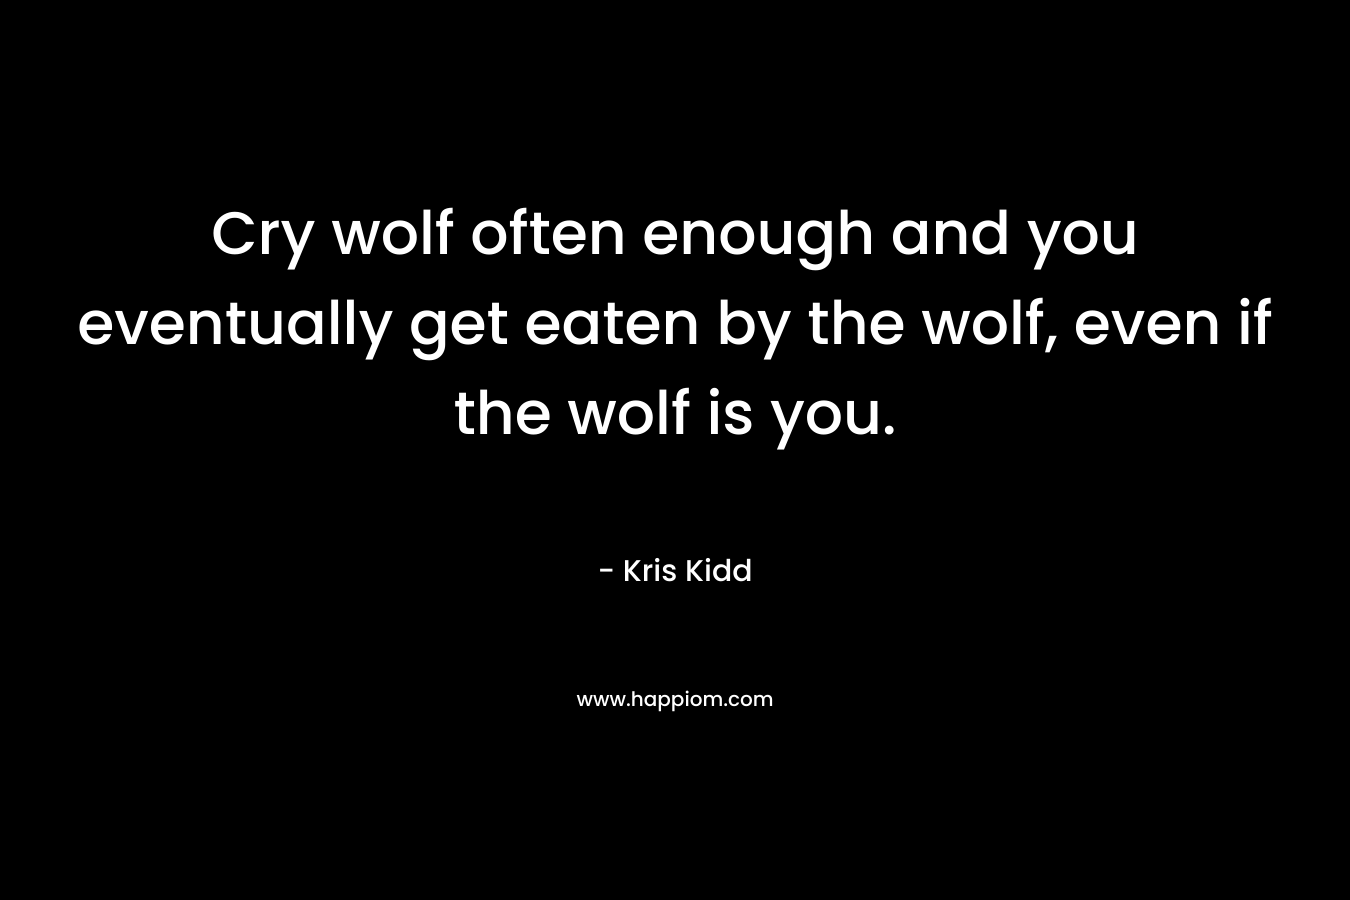 Cry wolf often enough and you eventually get eaten by the wolf, even if the wolf is you.